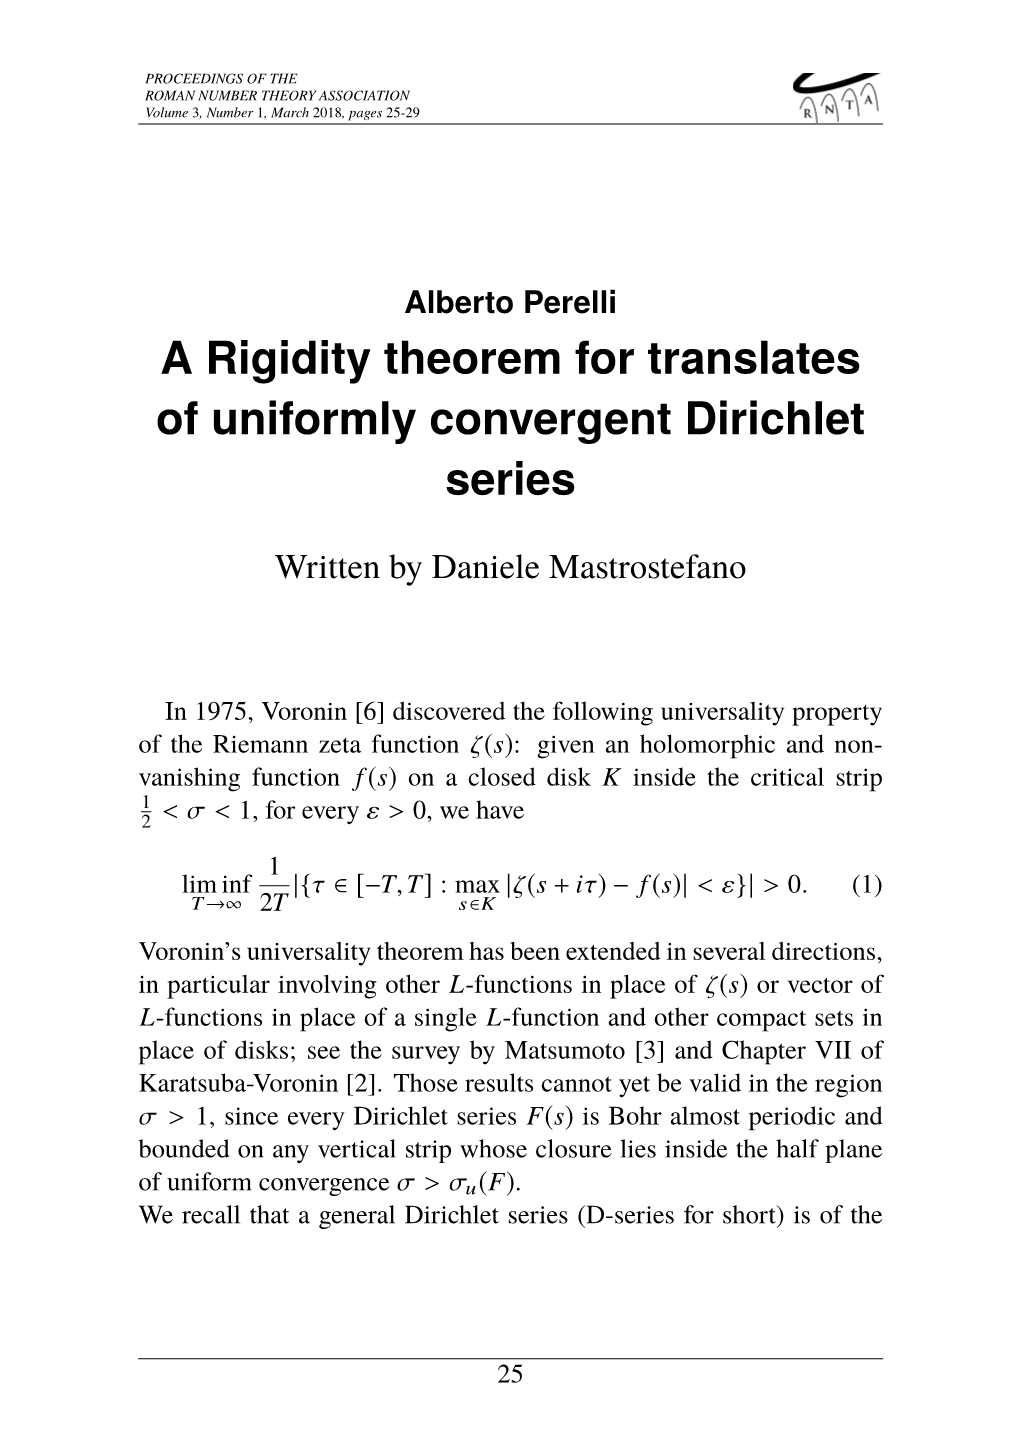 A Rigidity Theorem for Translates of Uniformly Convergent Dirichlet Series